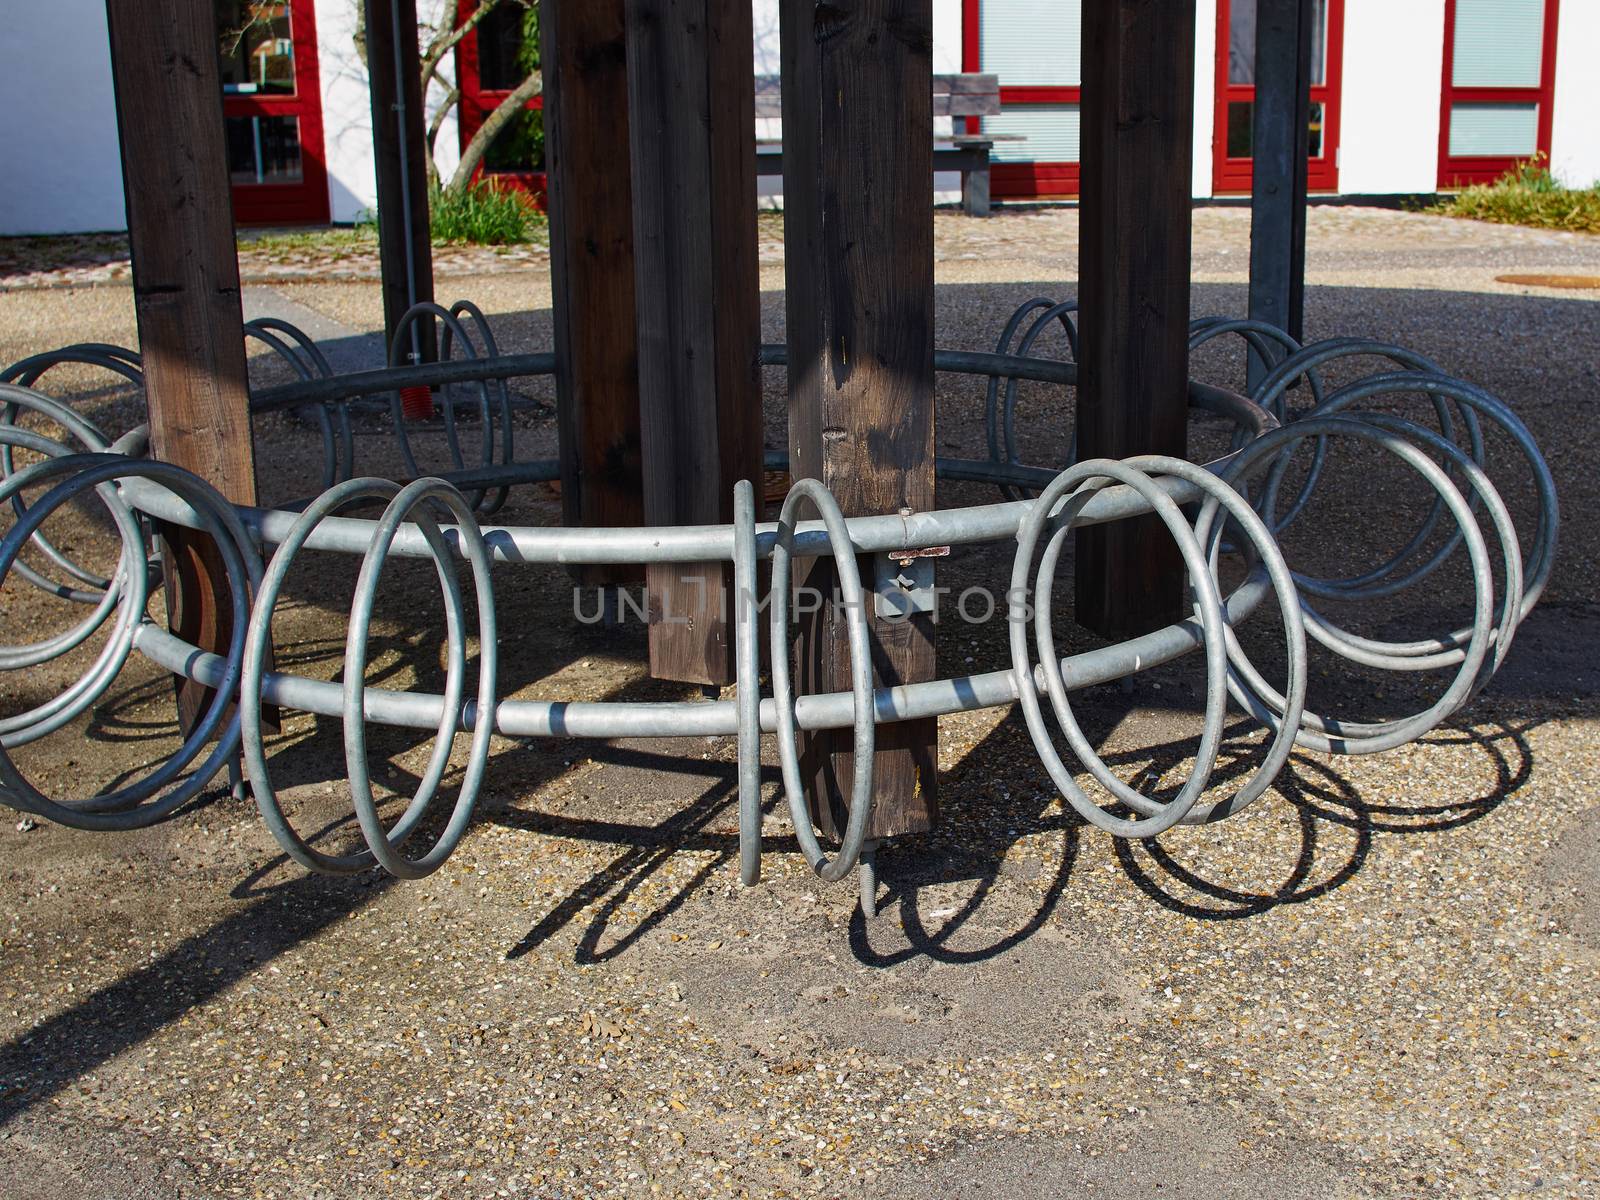 Parking space rack for bicycles bikes by Ronyzmbow